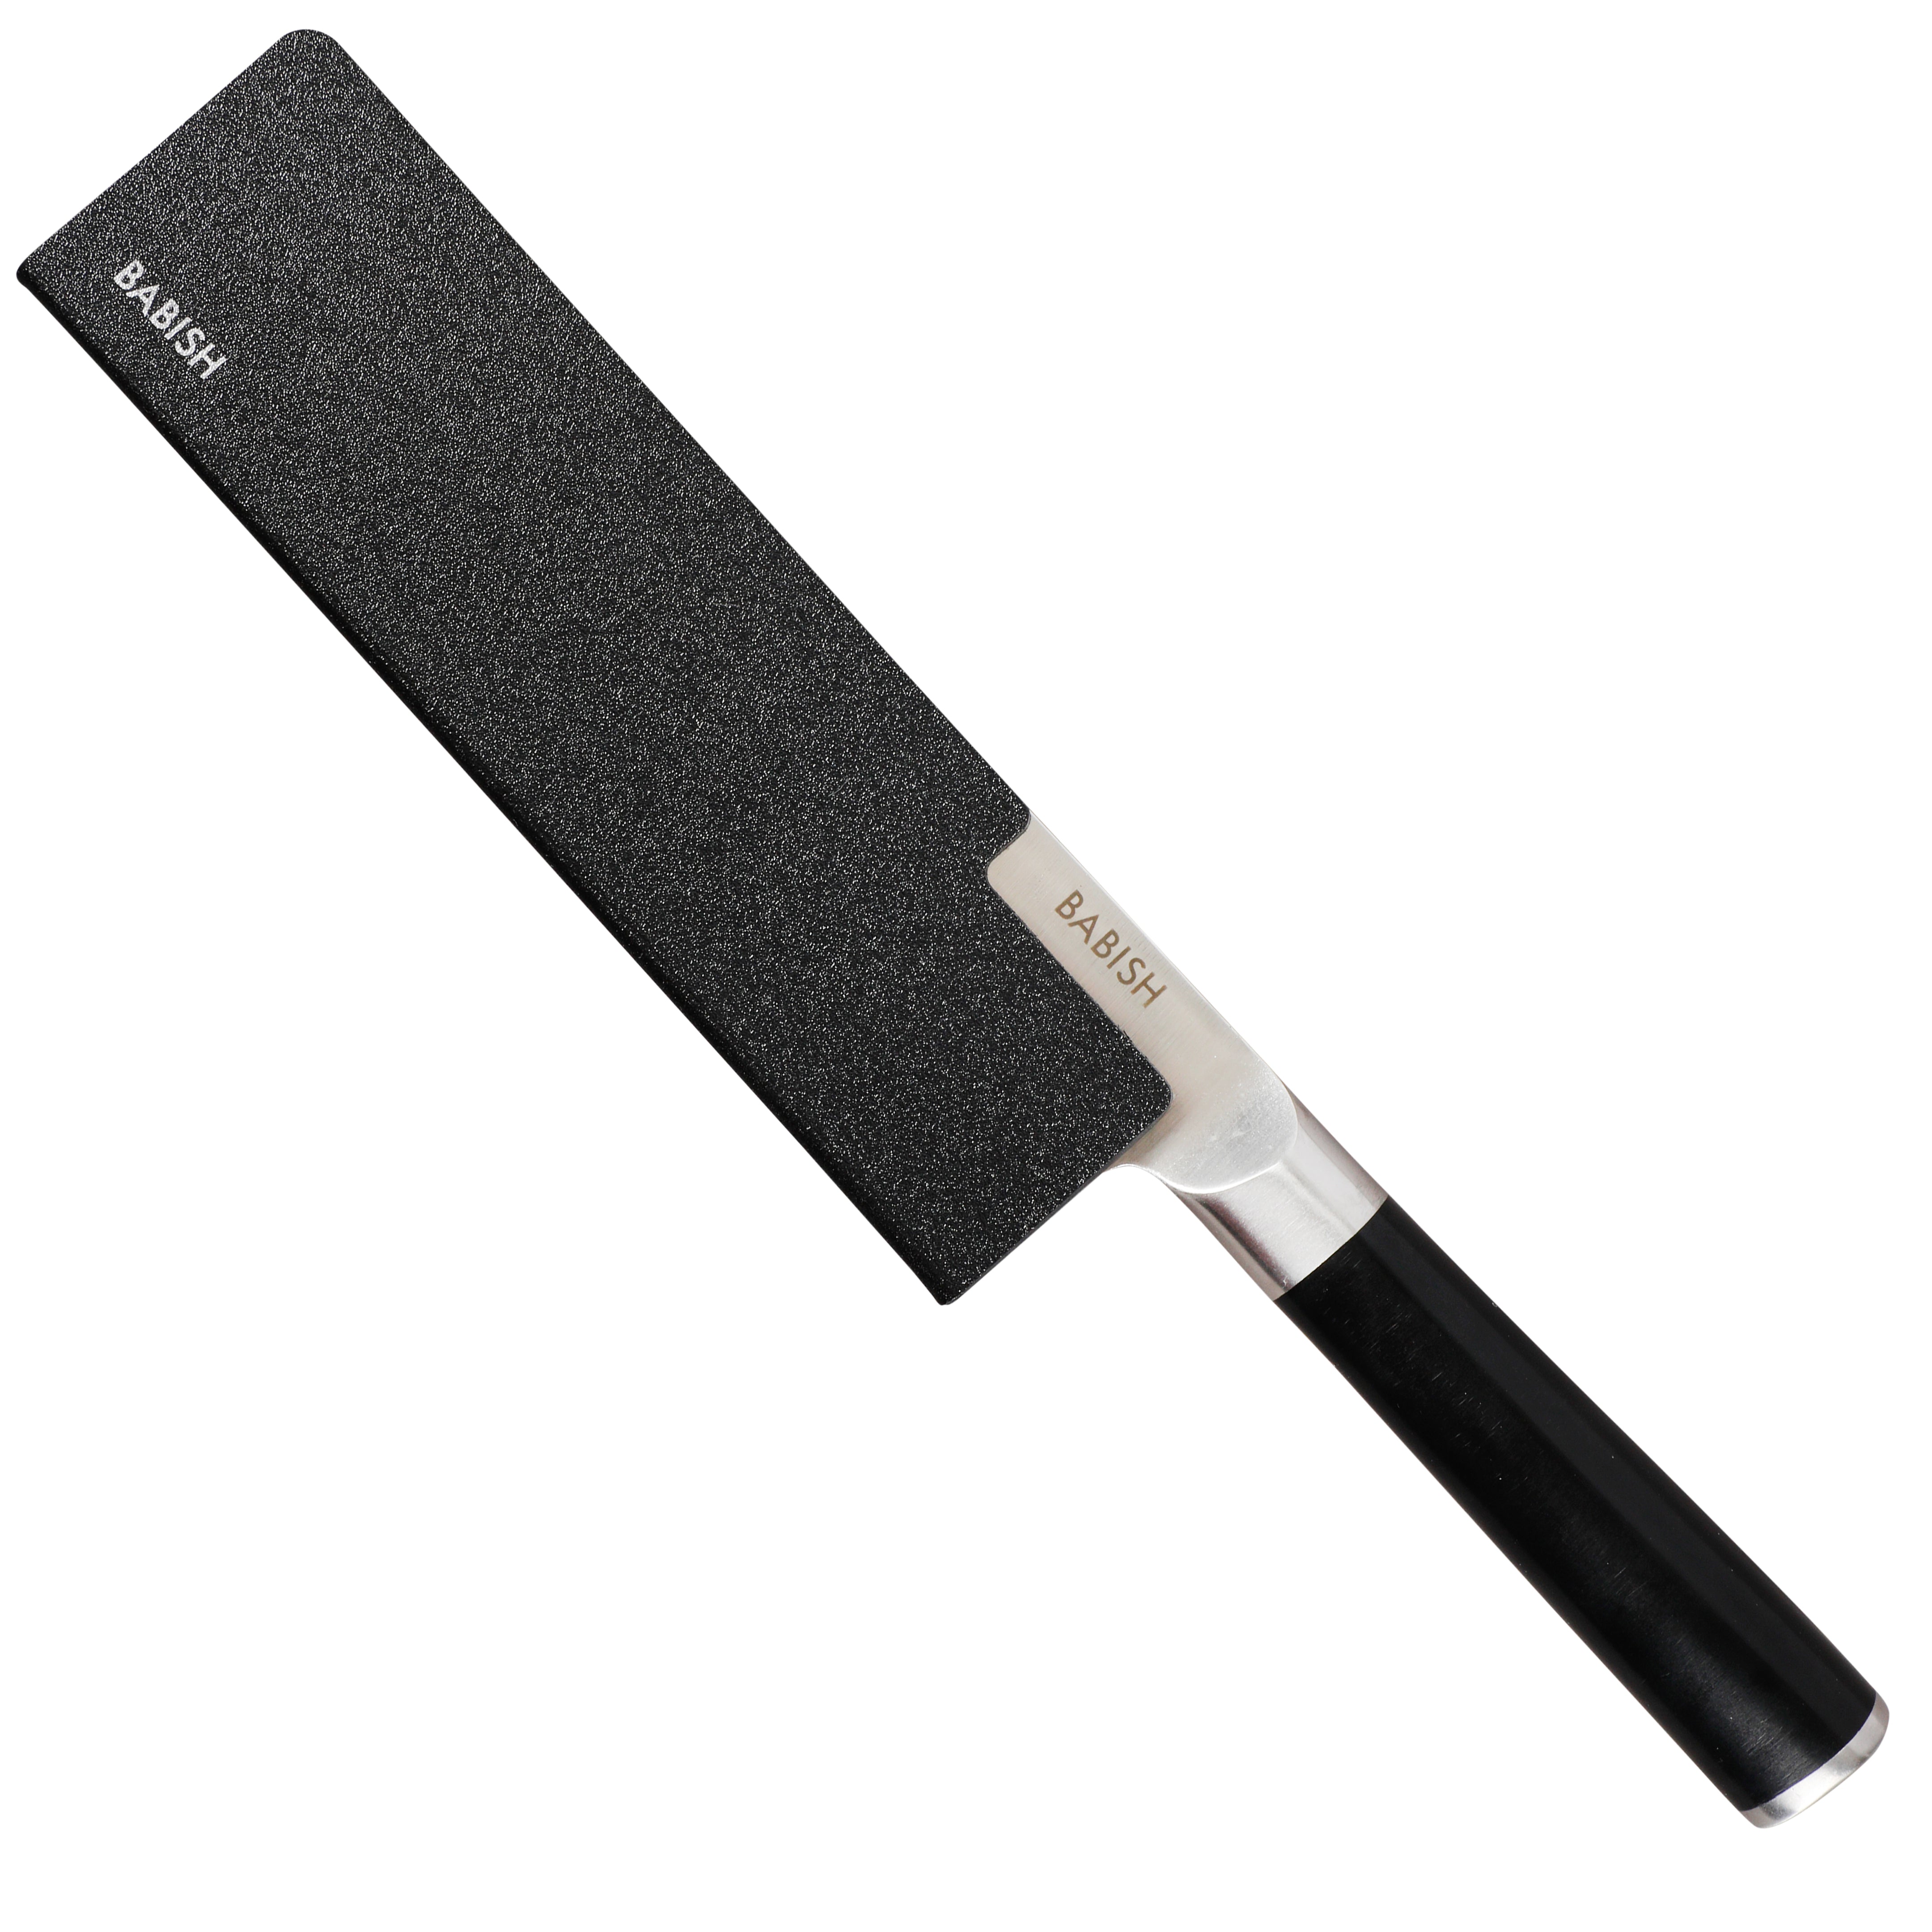 Babish High-Carbon 1.4116 German Steel Cutlery Knives, 8 Chef Knife